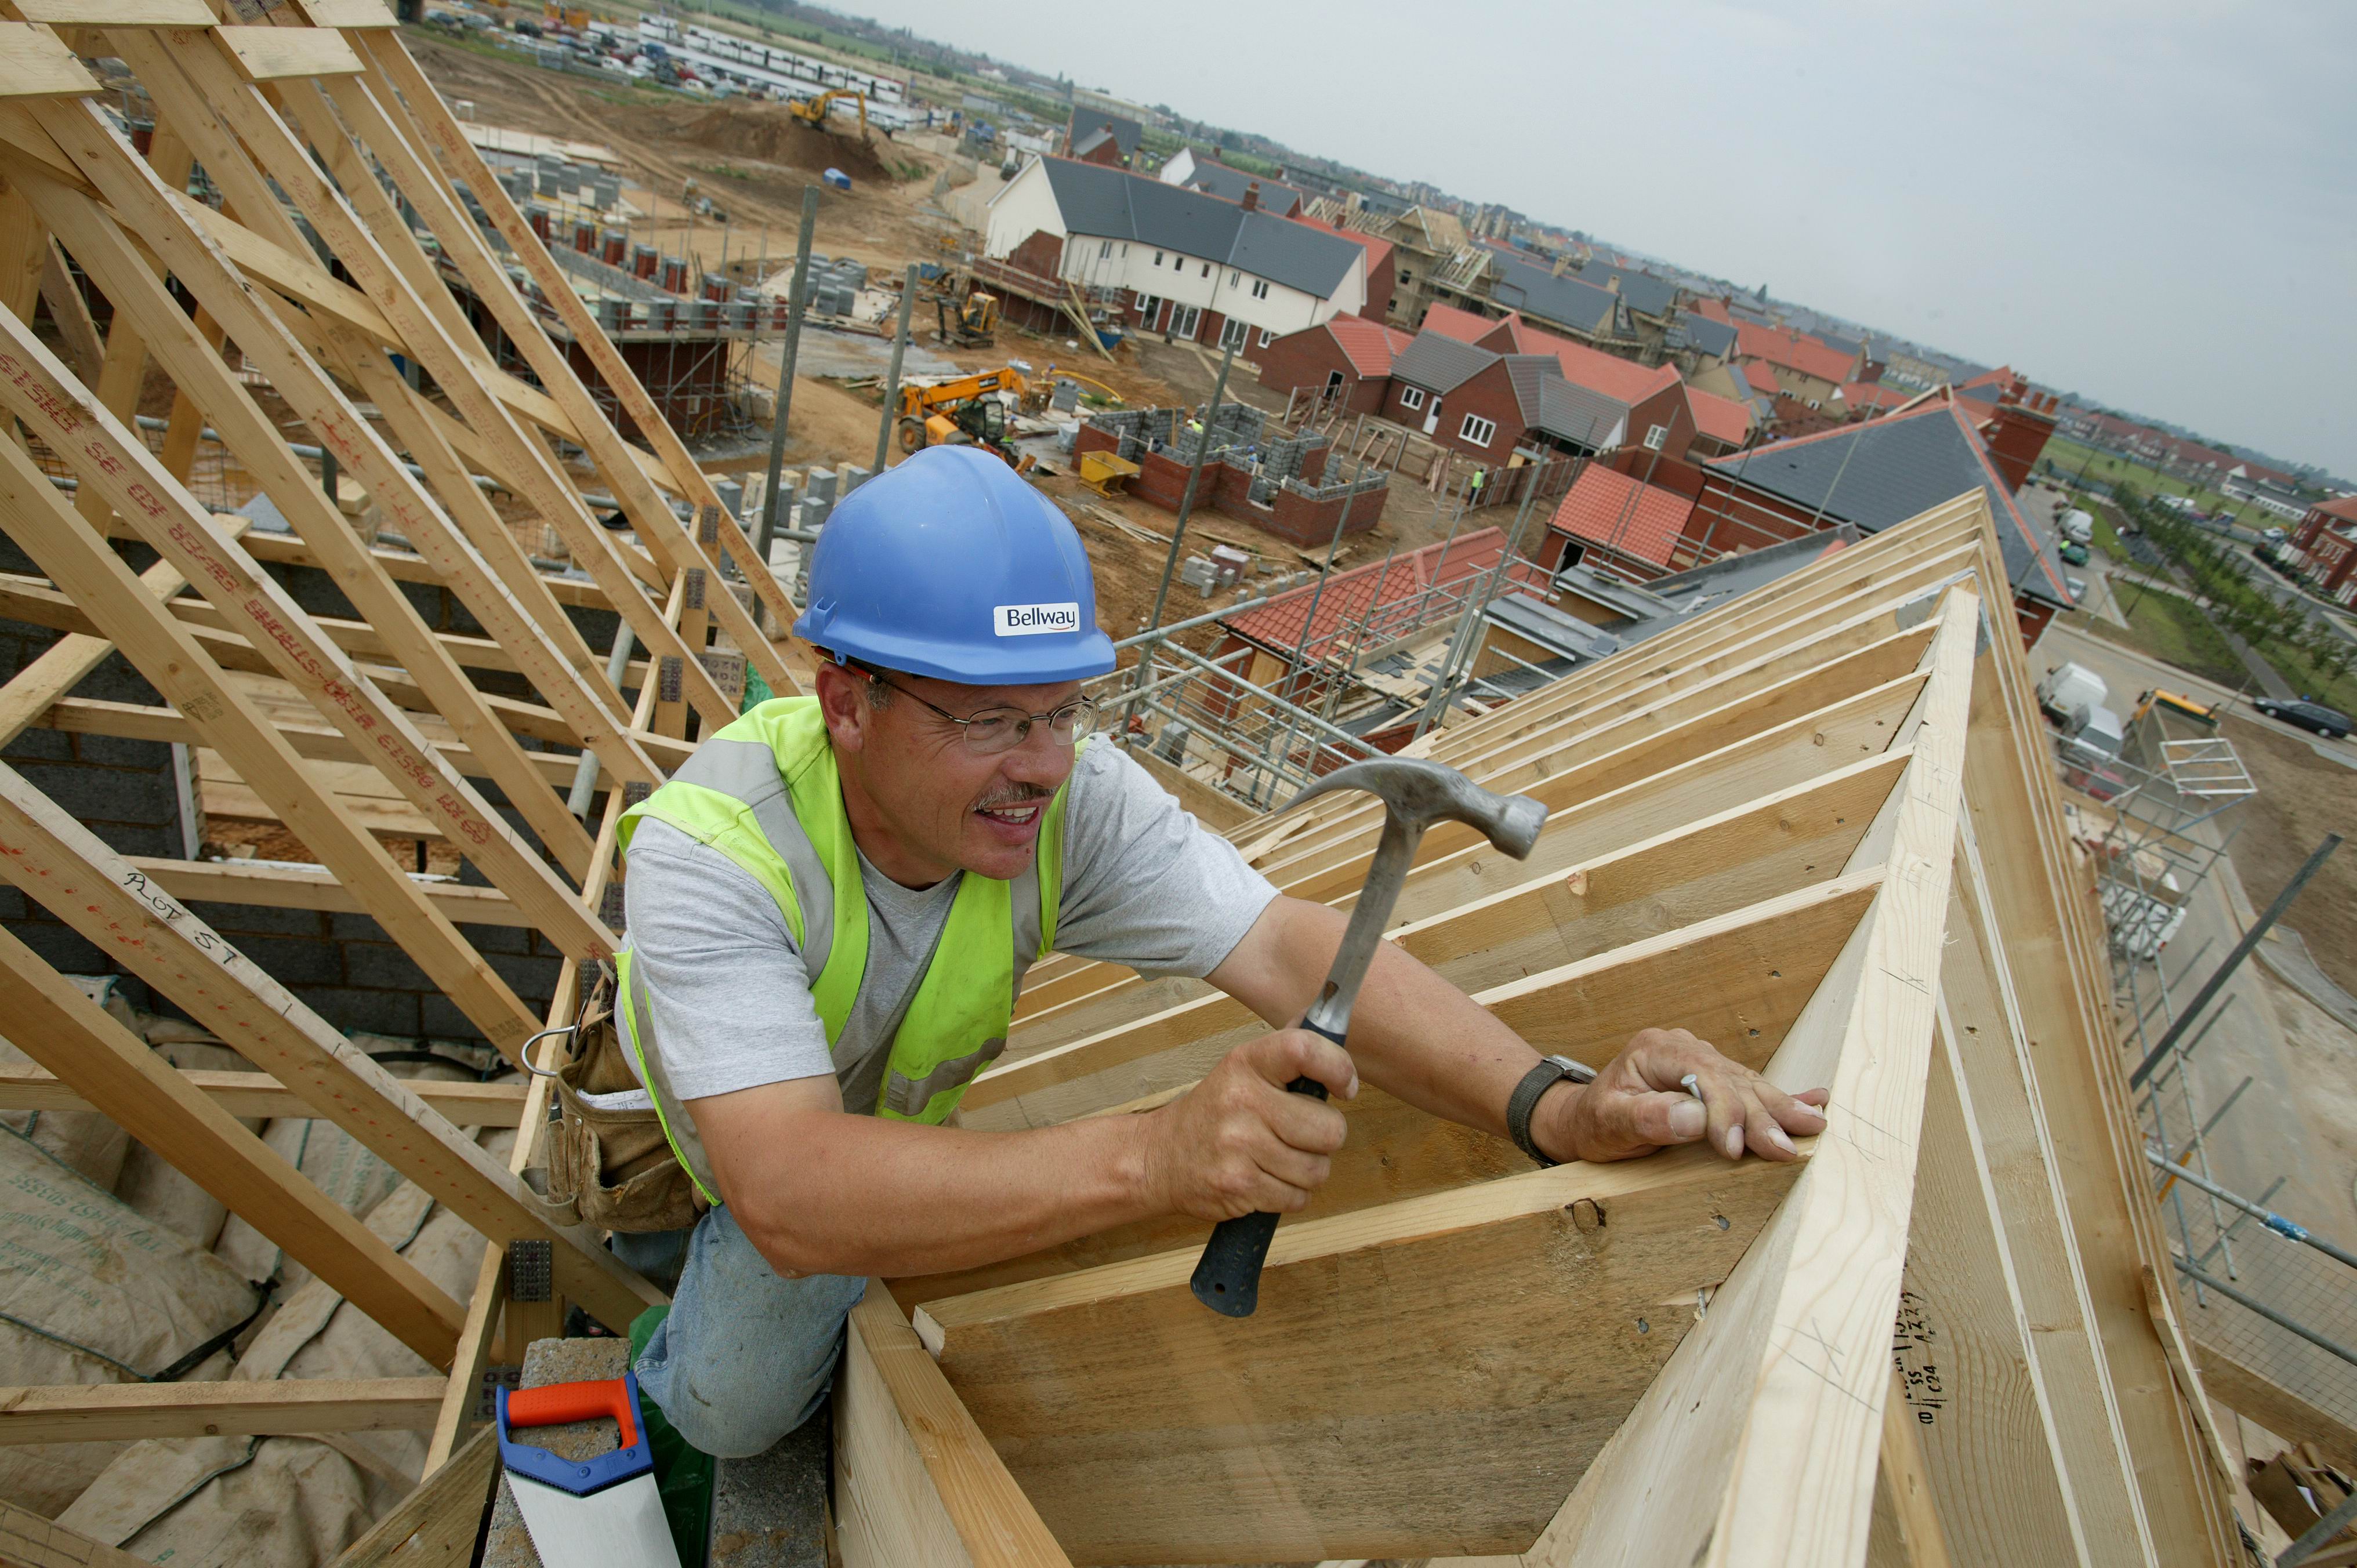 Government invests £78m to help construction sector return to work